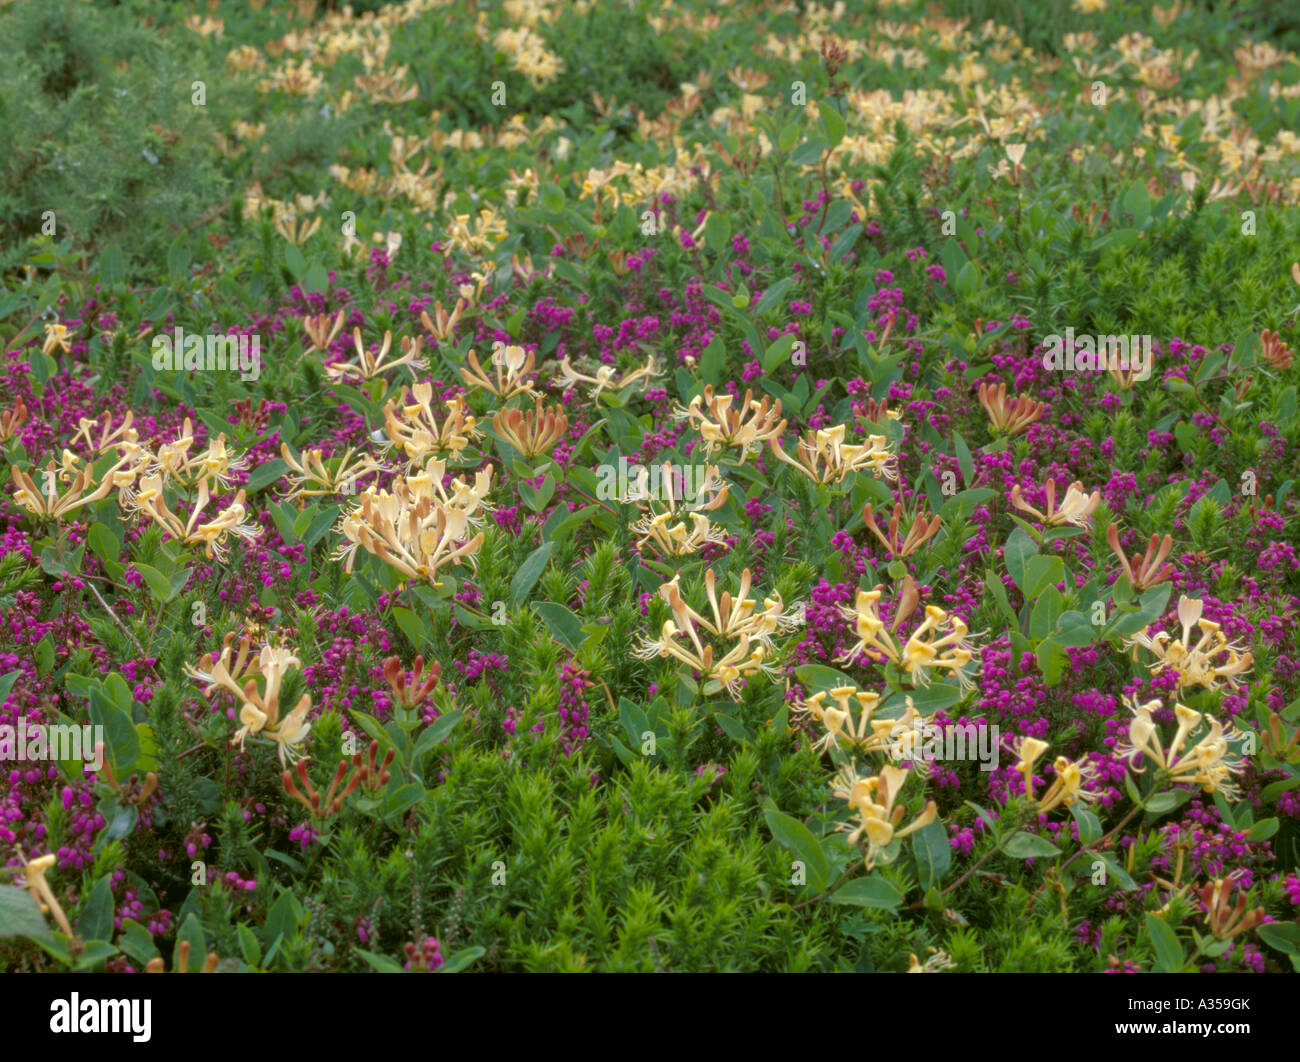 Honeysuckle (Lonicera periclymenum) and Bell Heather (Erica cinerea); Penrhyn Mawr, Holyhead, Anglesey, North Wales, UK. Stock Photo